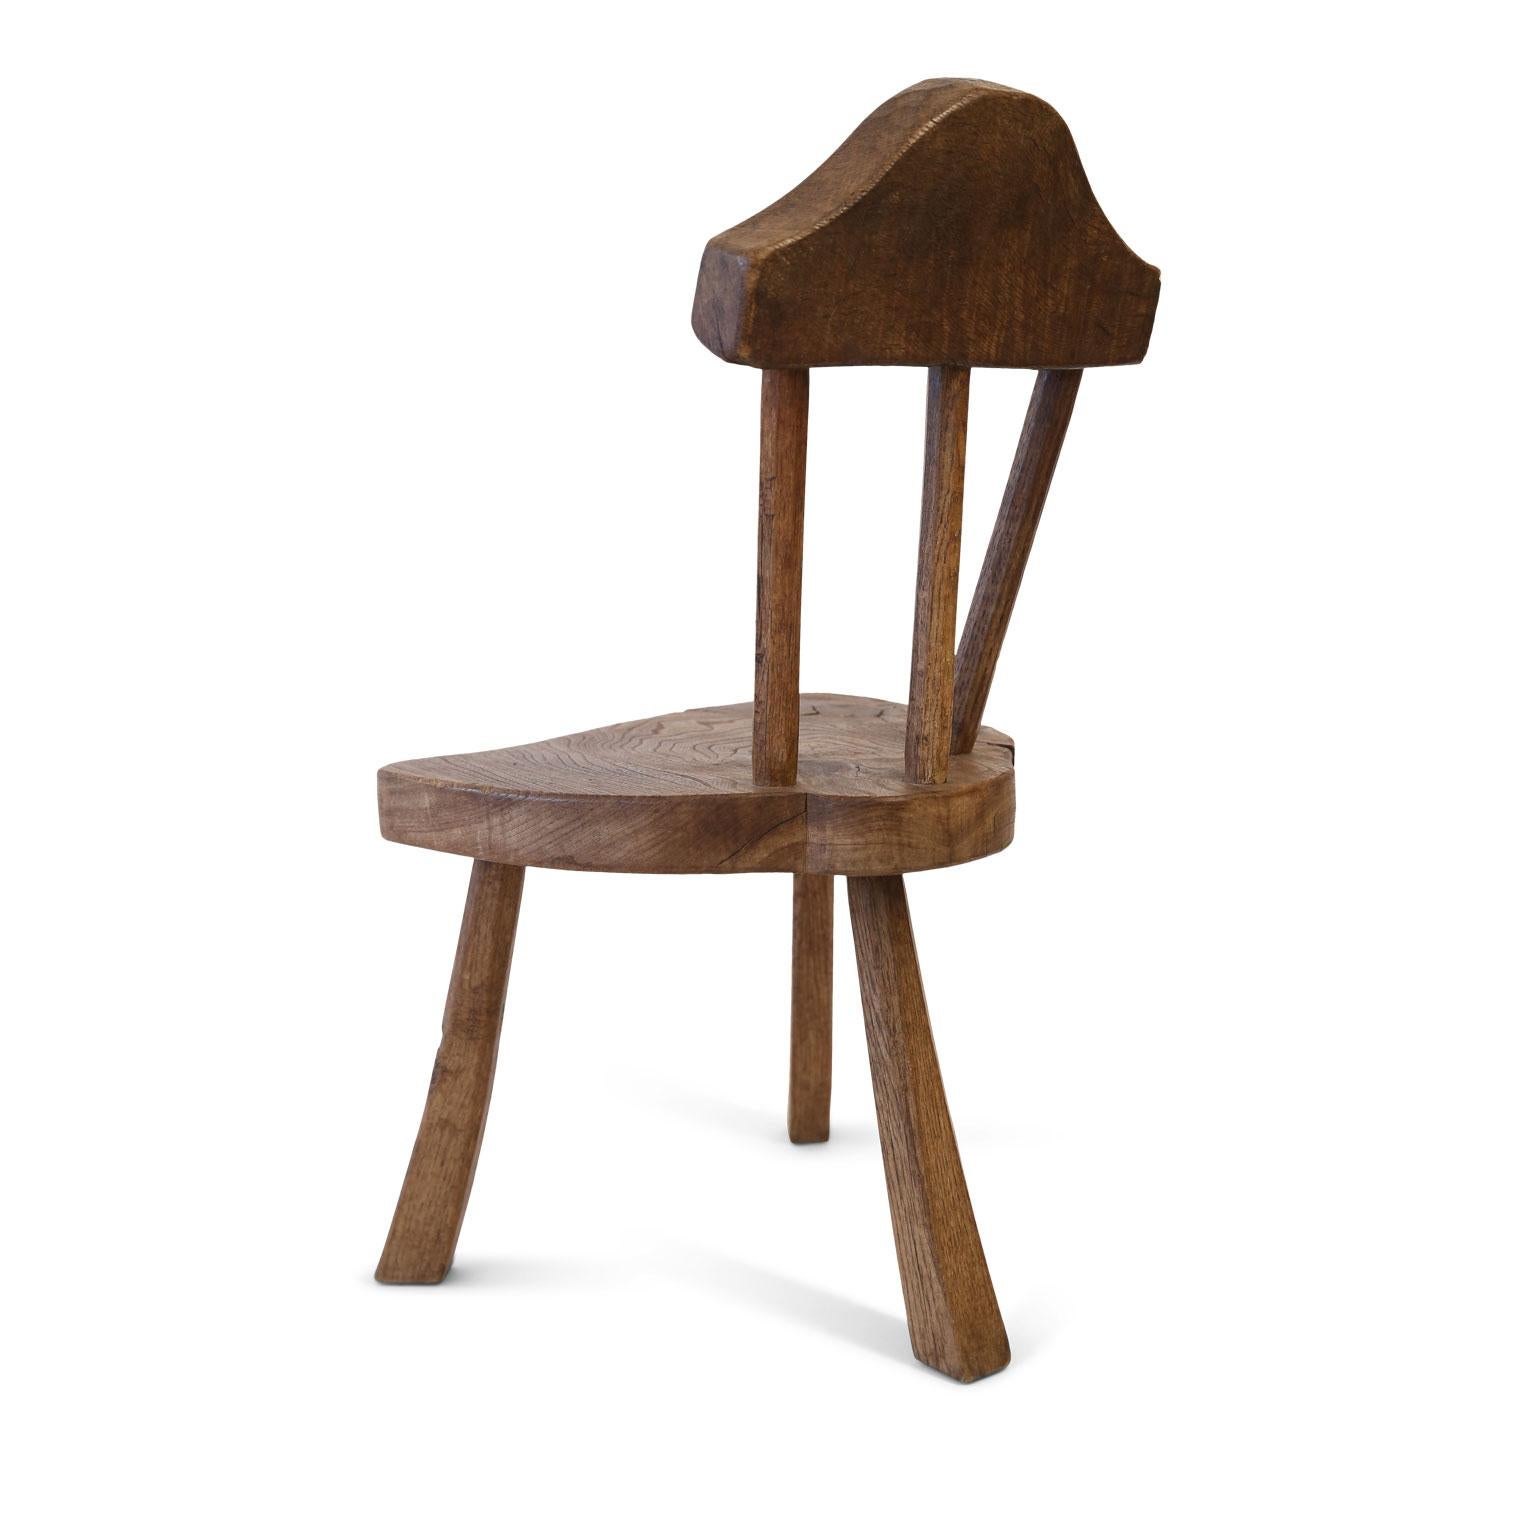 Hand-Carved Stick Back Chair in Mid-Brown Oak